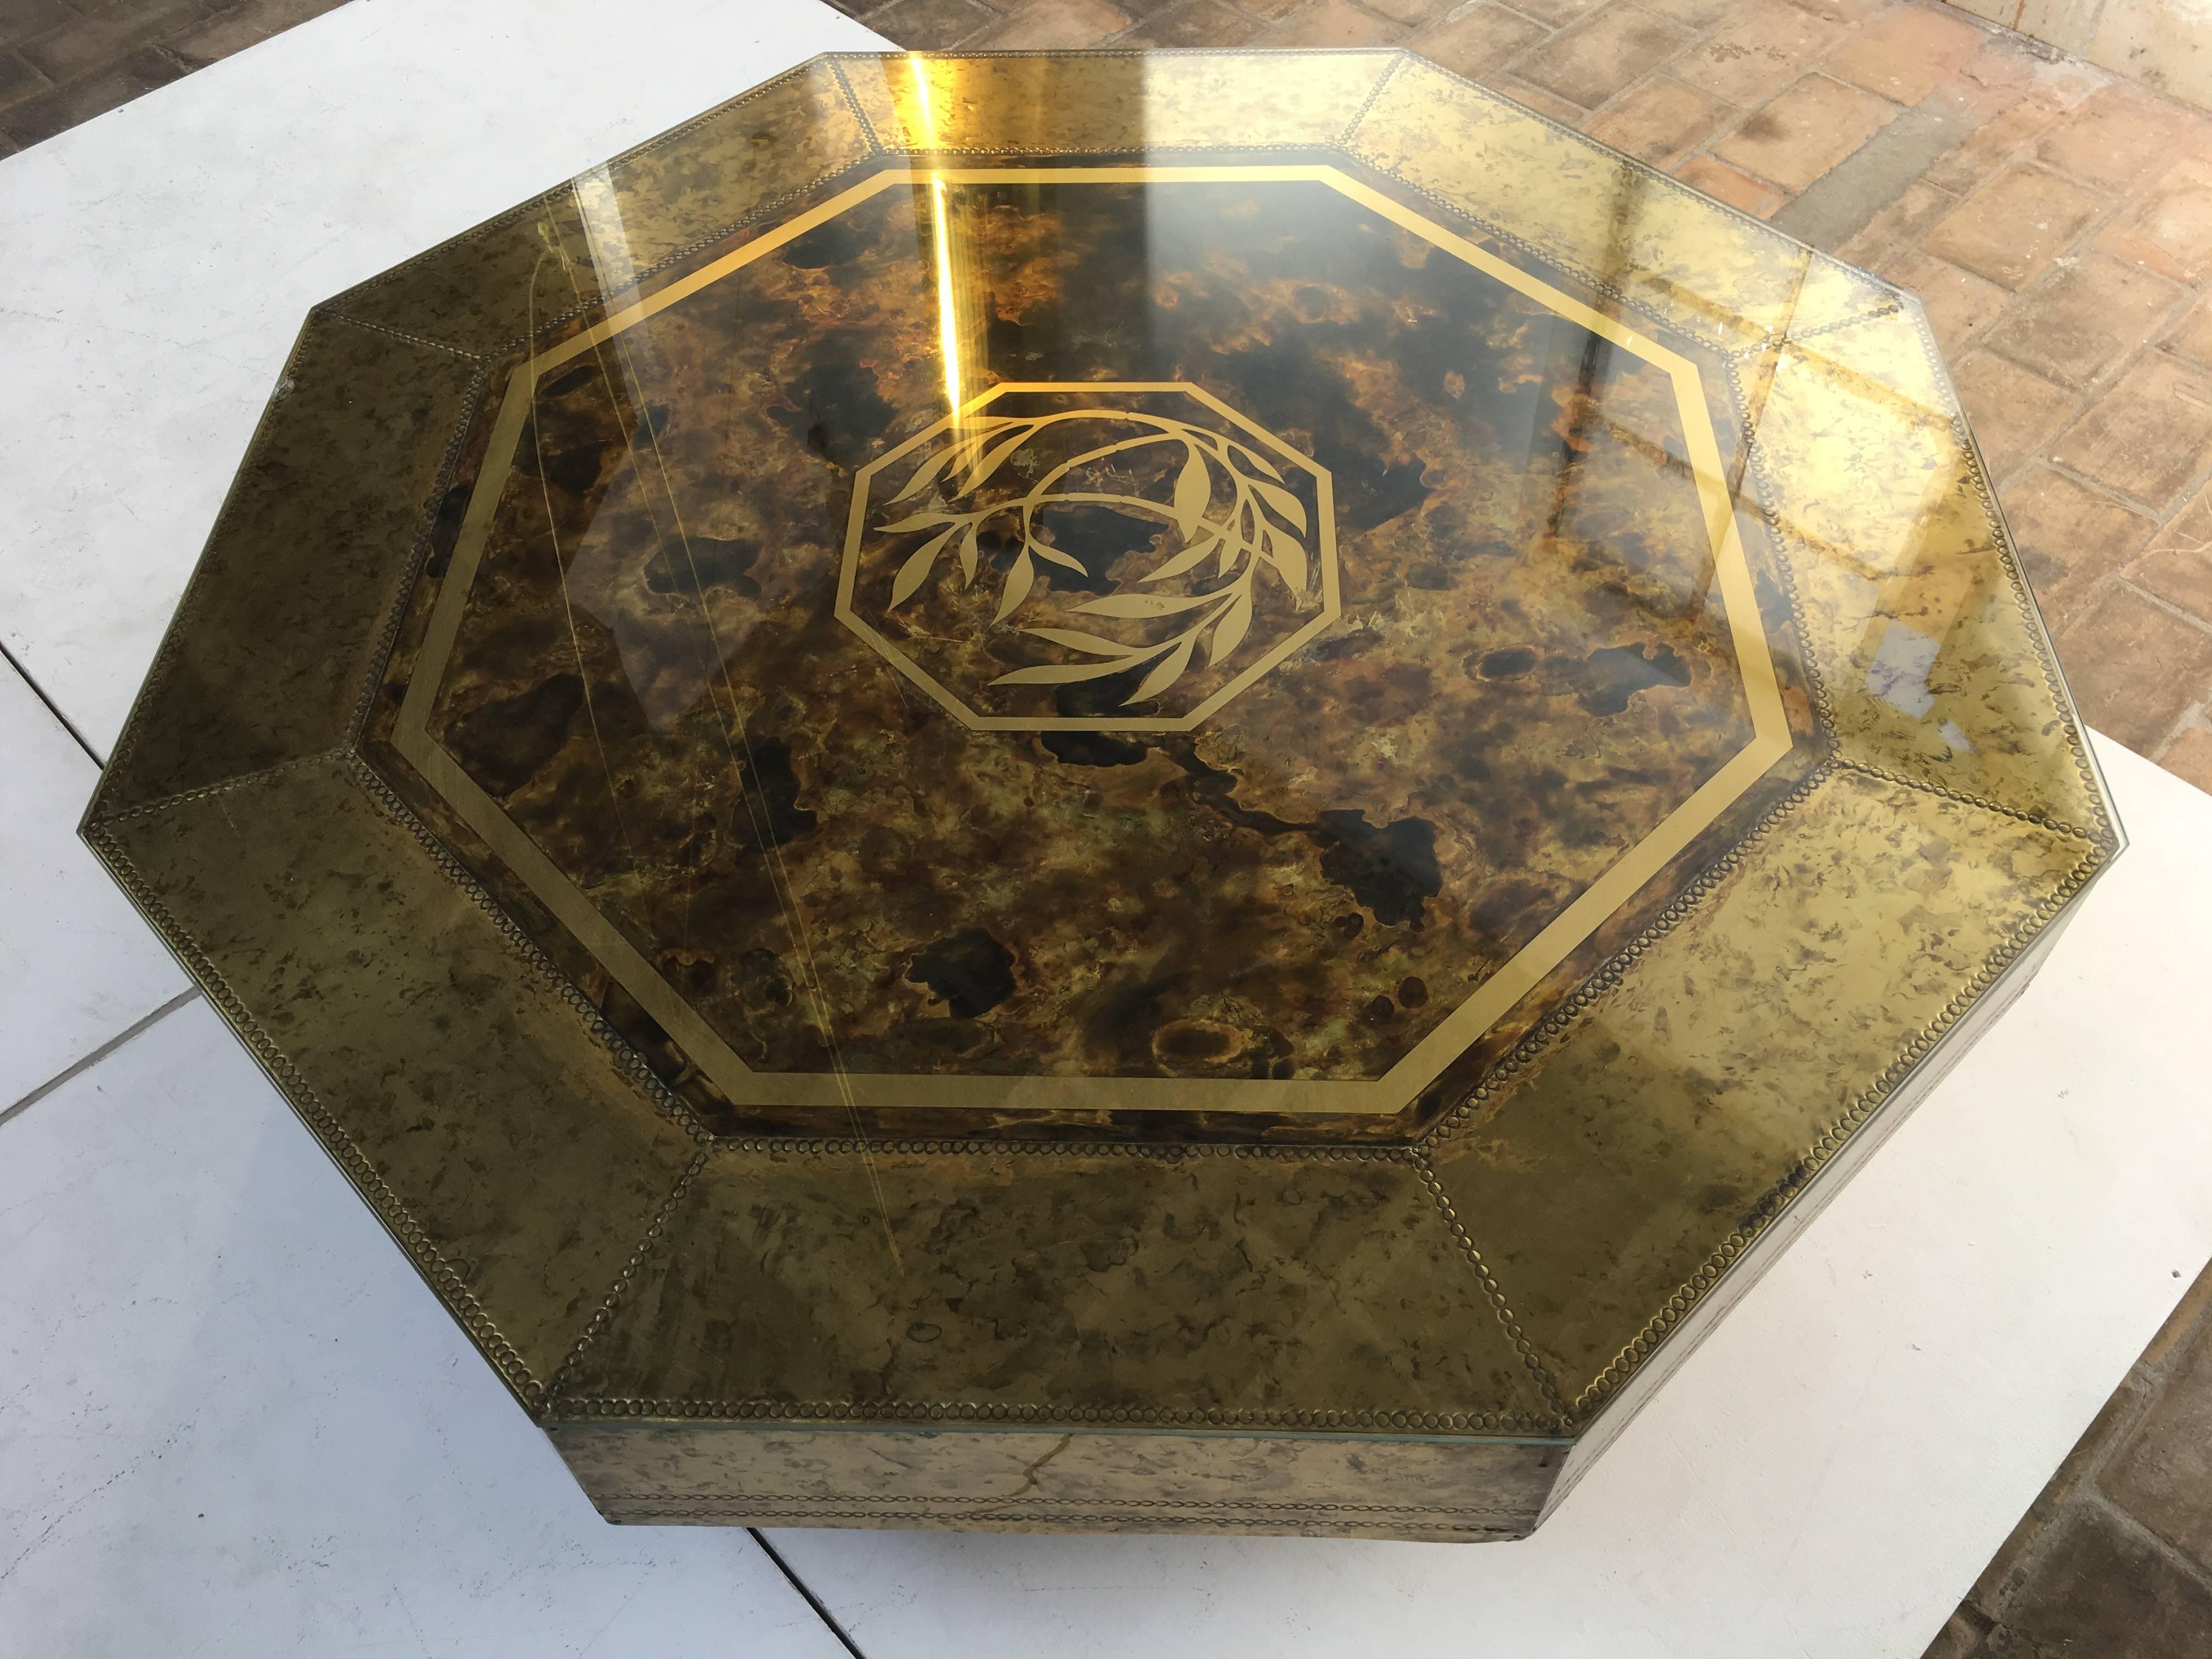 Stunning 1970s 'Mastercraft', Acid Etched Brass Table by Sculptor Bernhard Rohne In Good Condition For Sale In bergen op zoom, NL